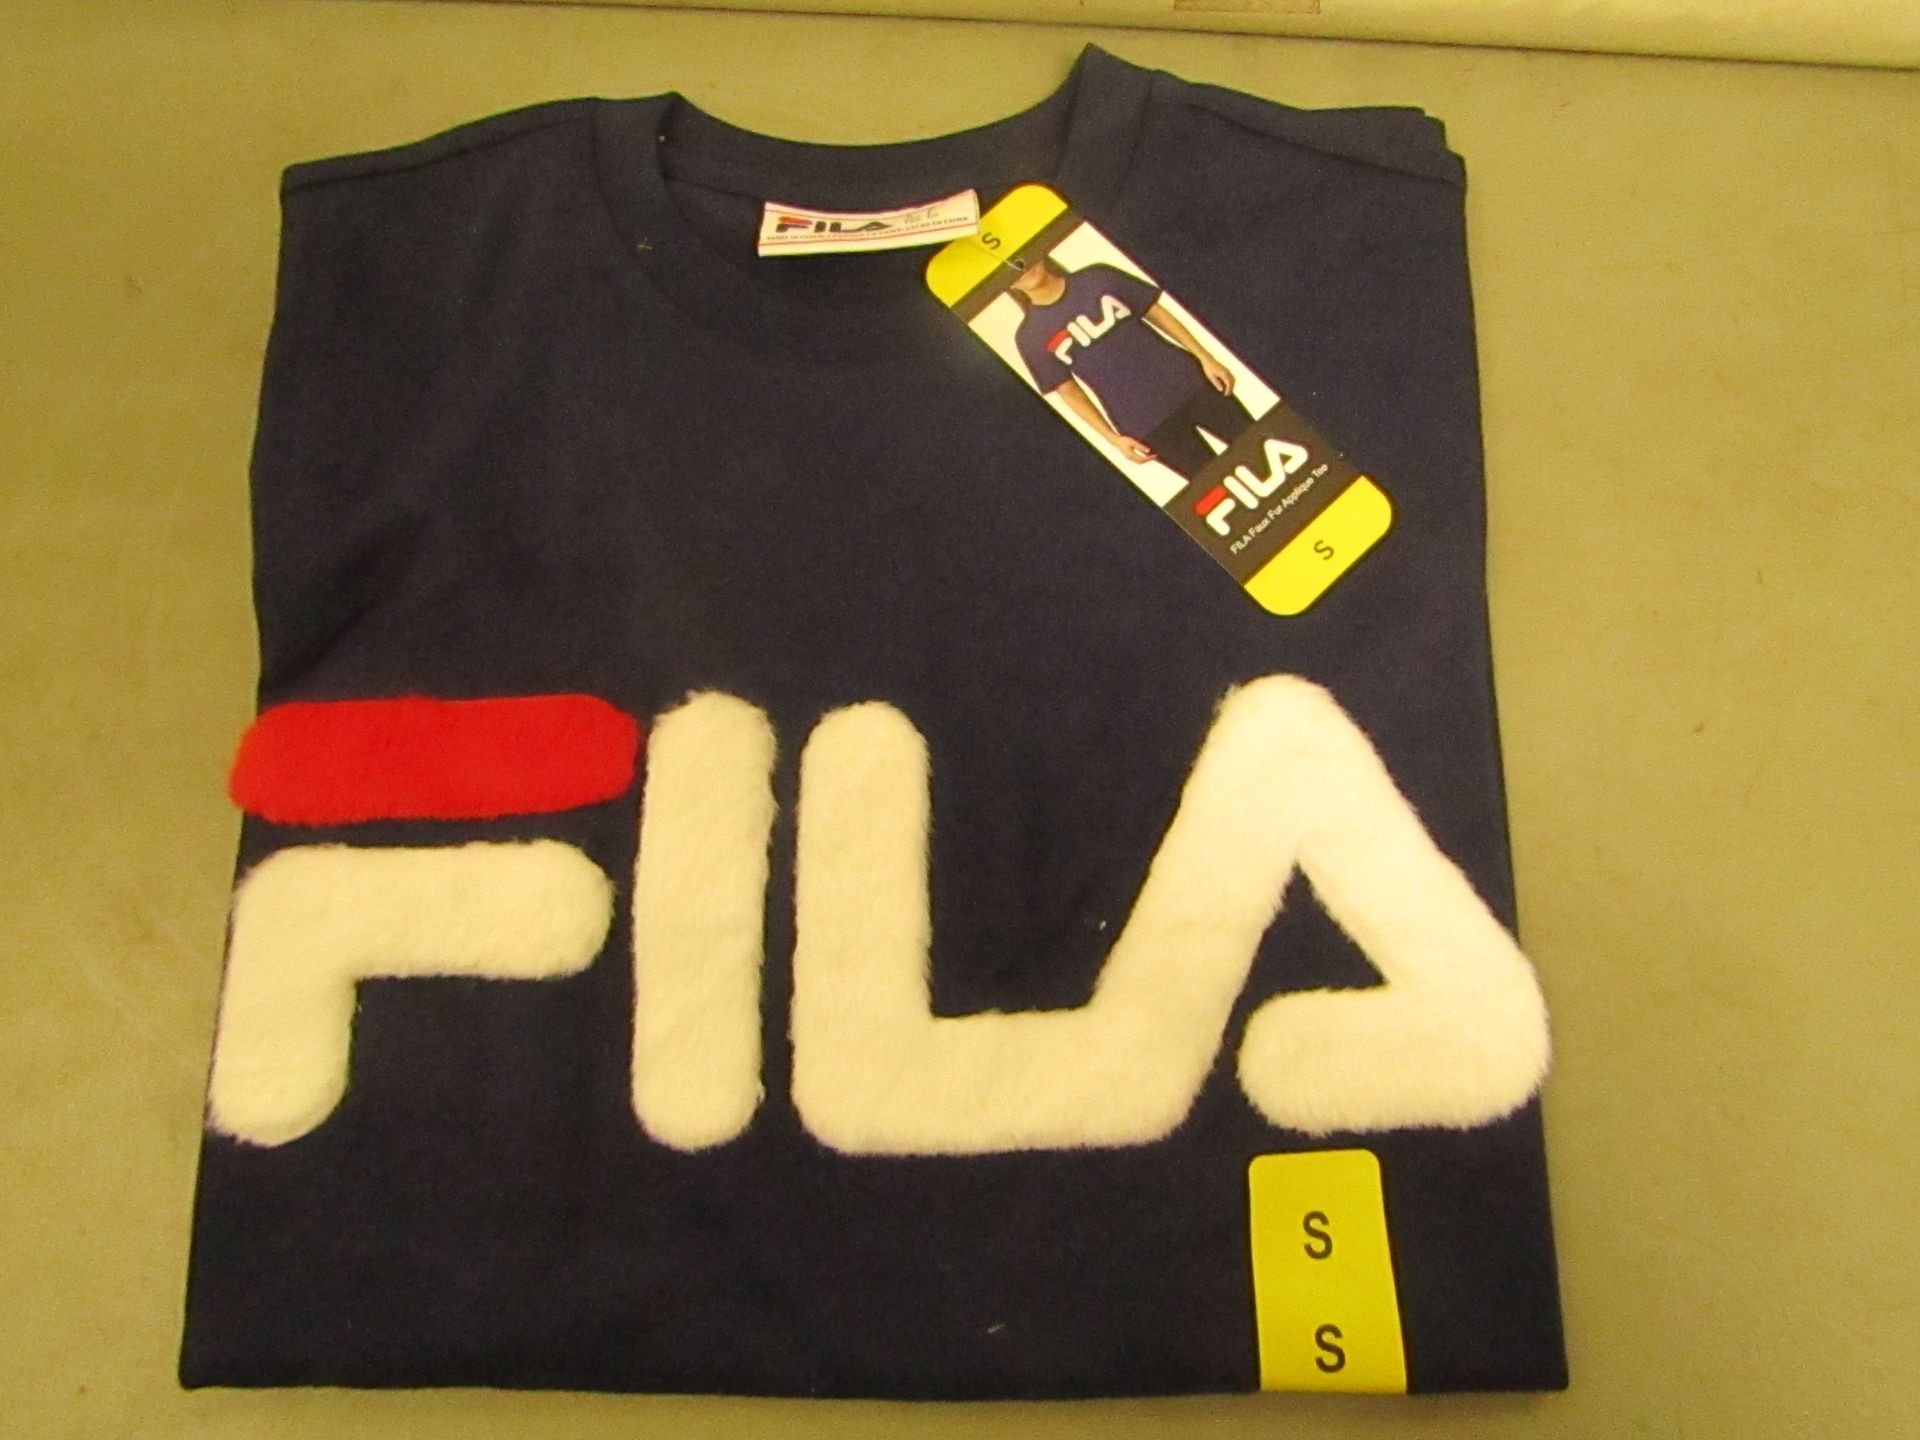 Fila T/Shirt With Faux Fur Design on The Front Navy Ladies Size S New With Tags